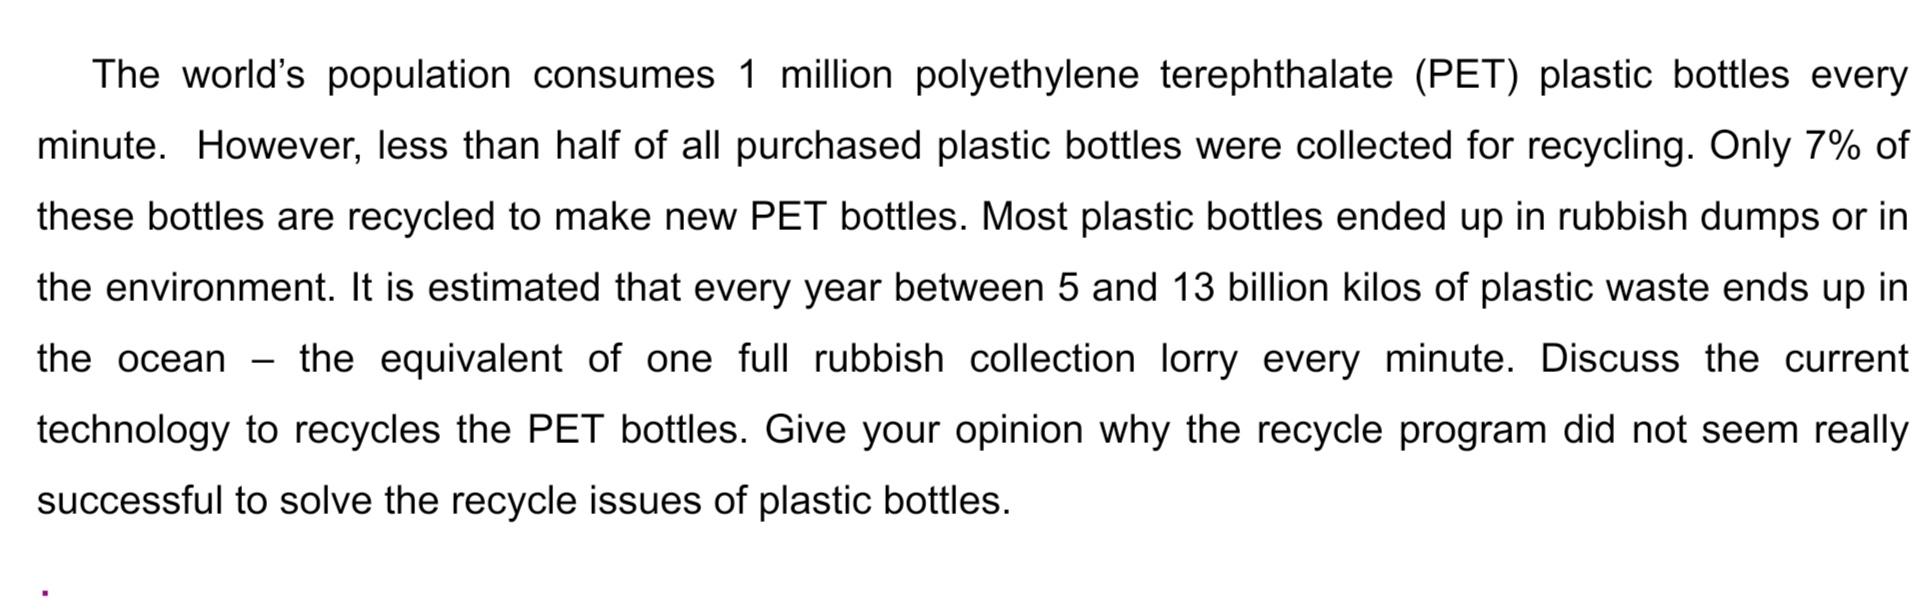 The worlds population consumes 1 million polyethylene terephthalate (PET) plastic bottles every minute. However, less than h